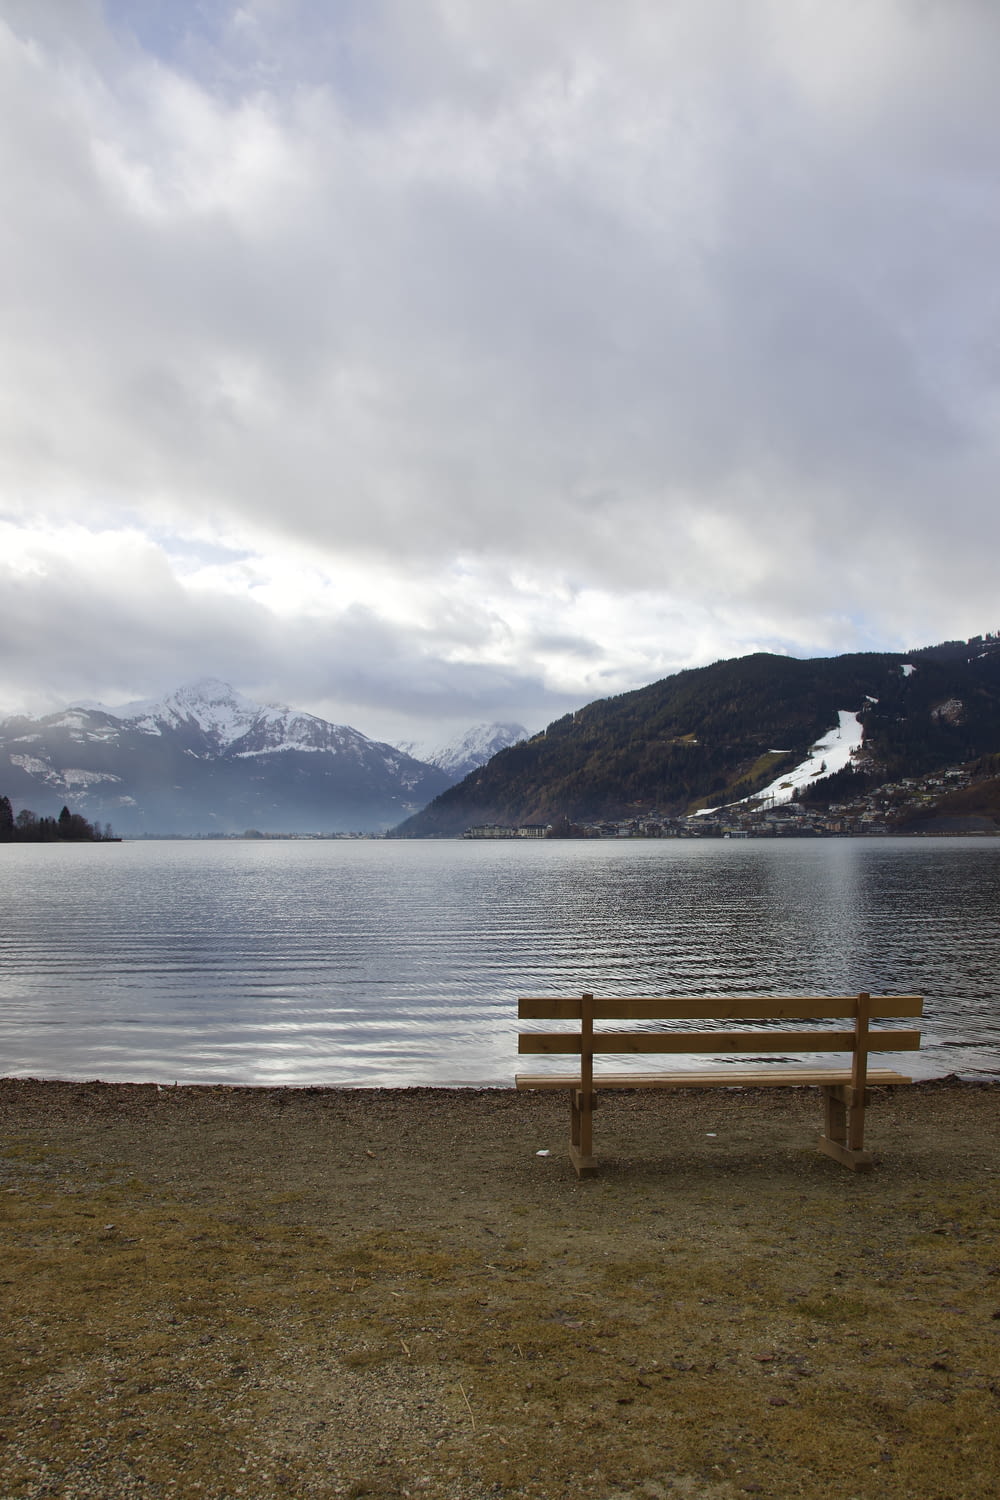 a wooden bench sitting on the shore of a lake